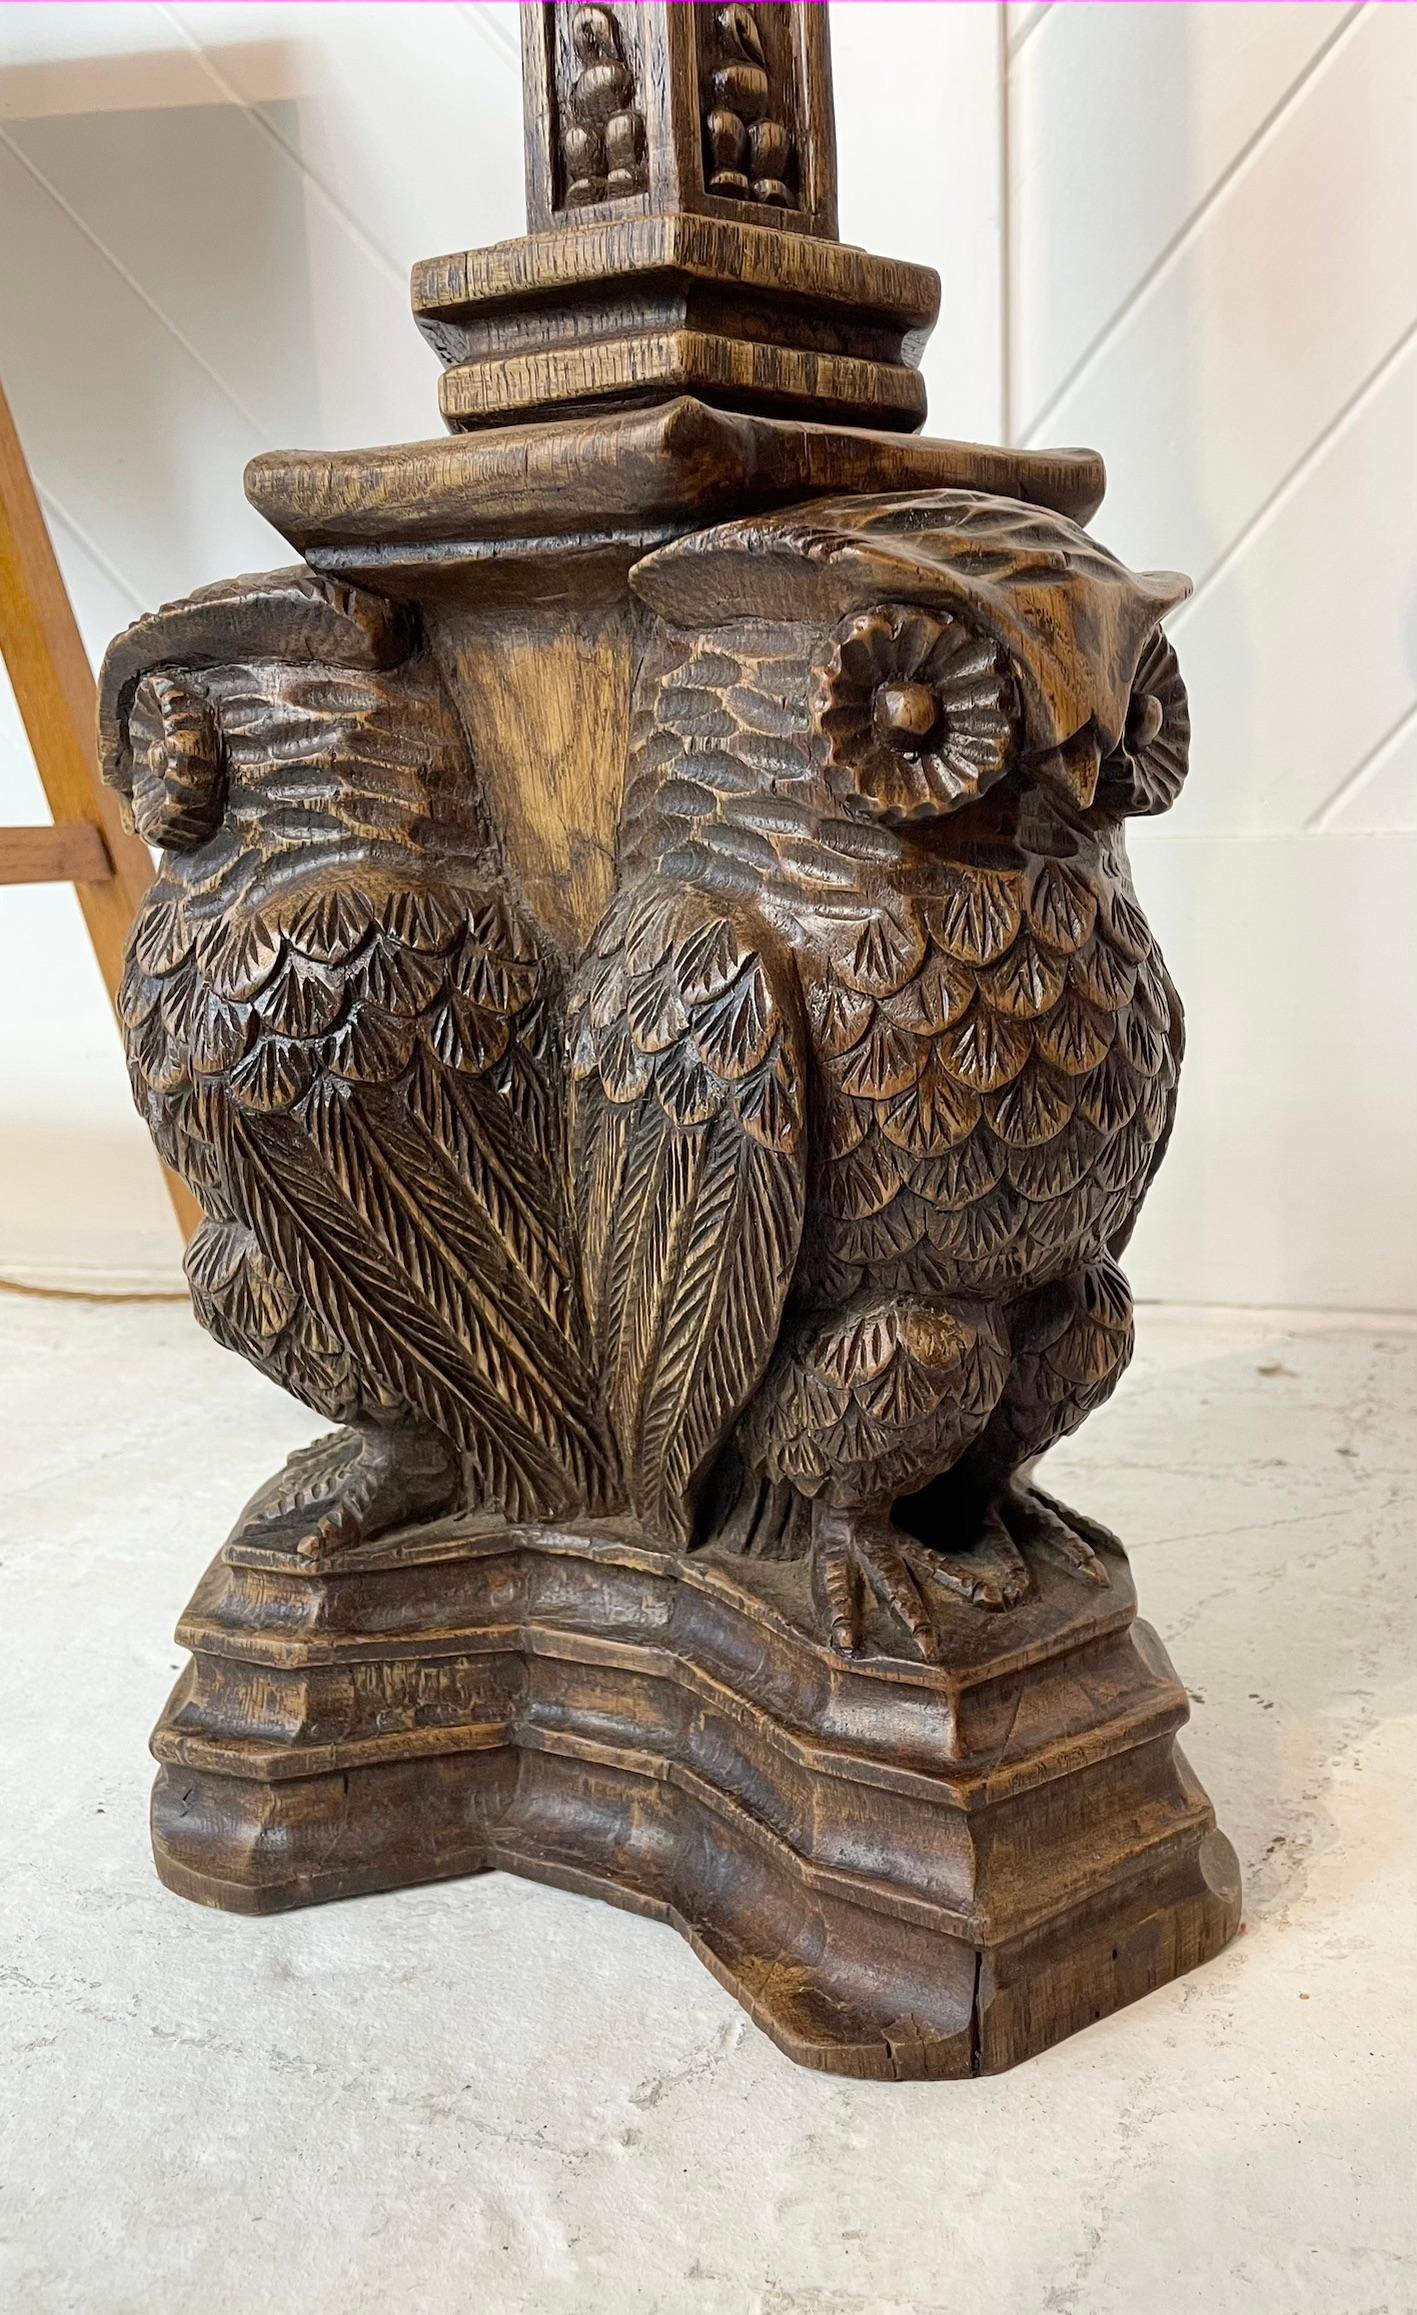 Magnificent carved oak standard lamp
The carving depicts stylised leaf design to the top and is further replicated on the stand
The column has carved insects around it
The base depicts 3 carved large owls standing on a plinth
It is in the manner of